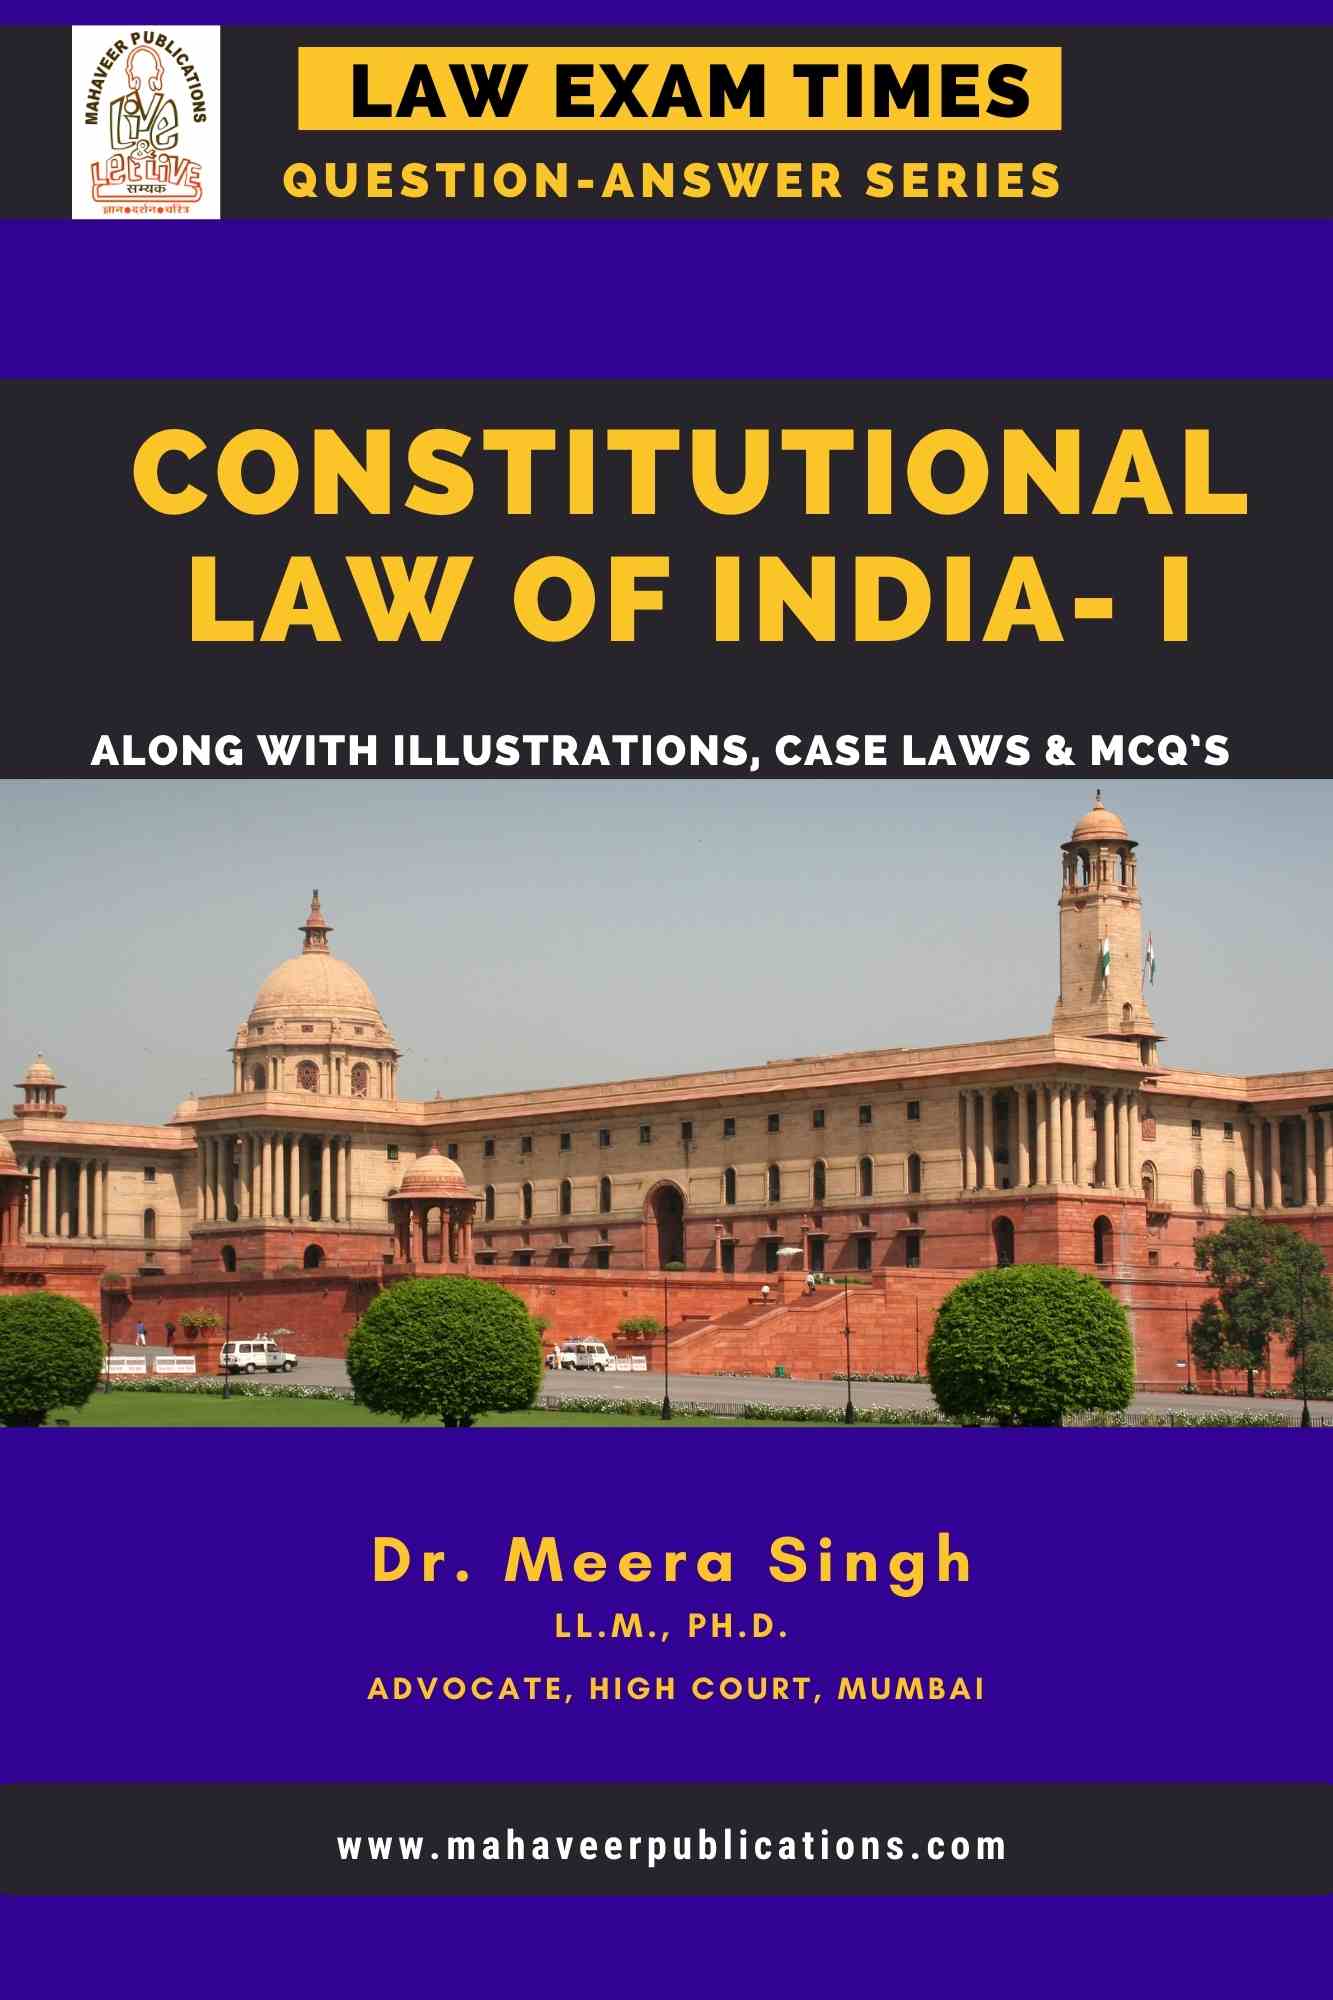 Constitutional-law-of-india-i.jpg